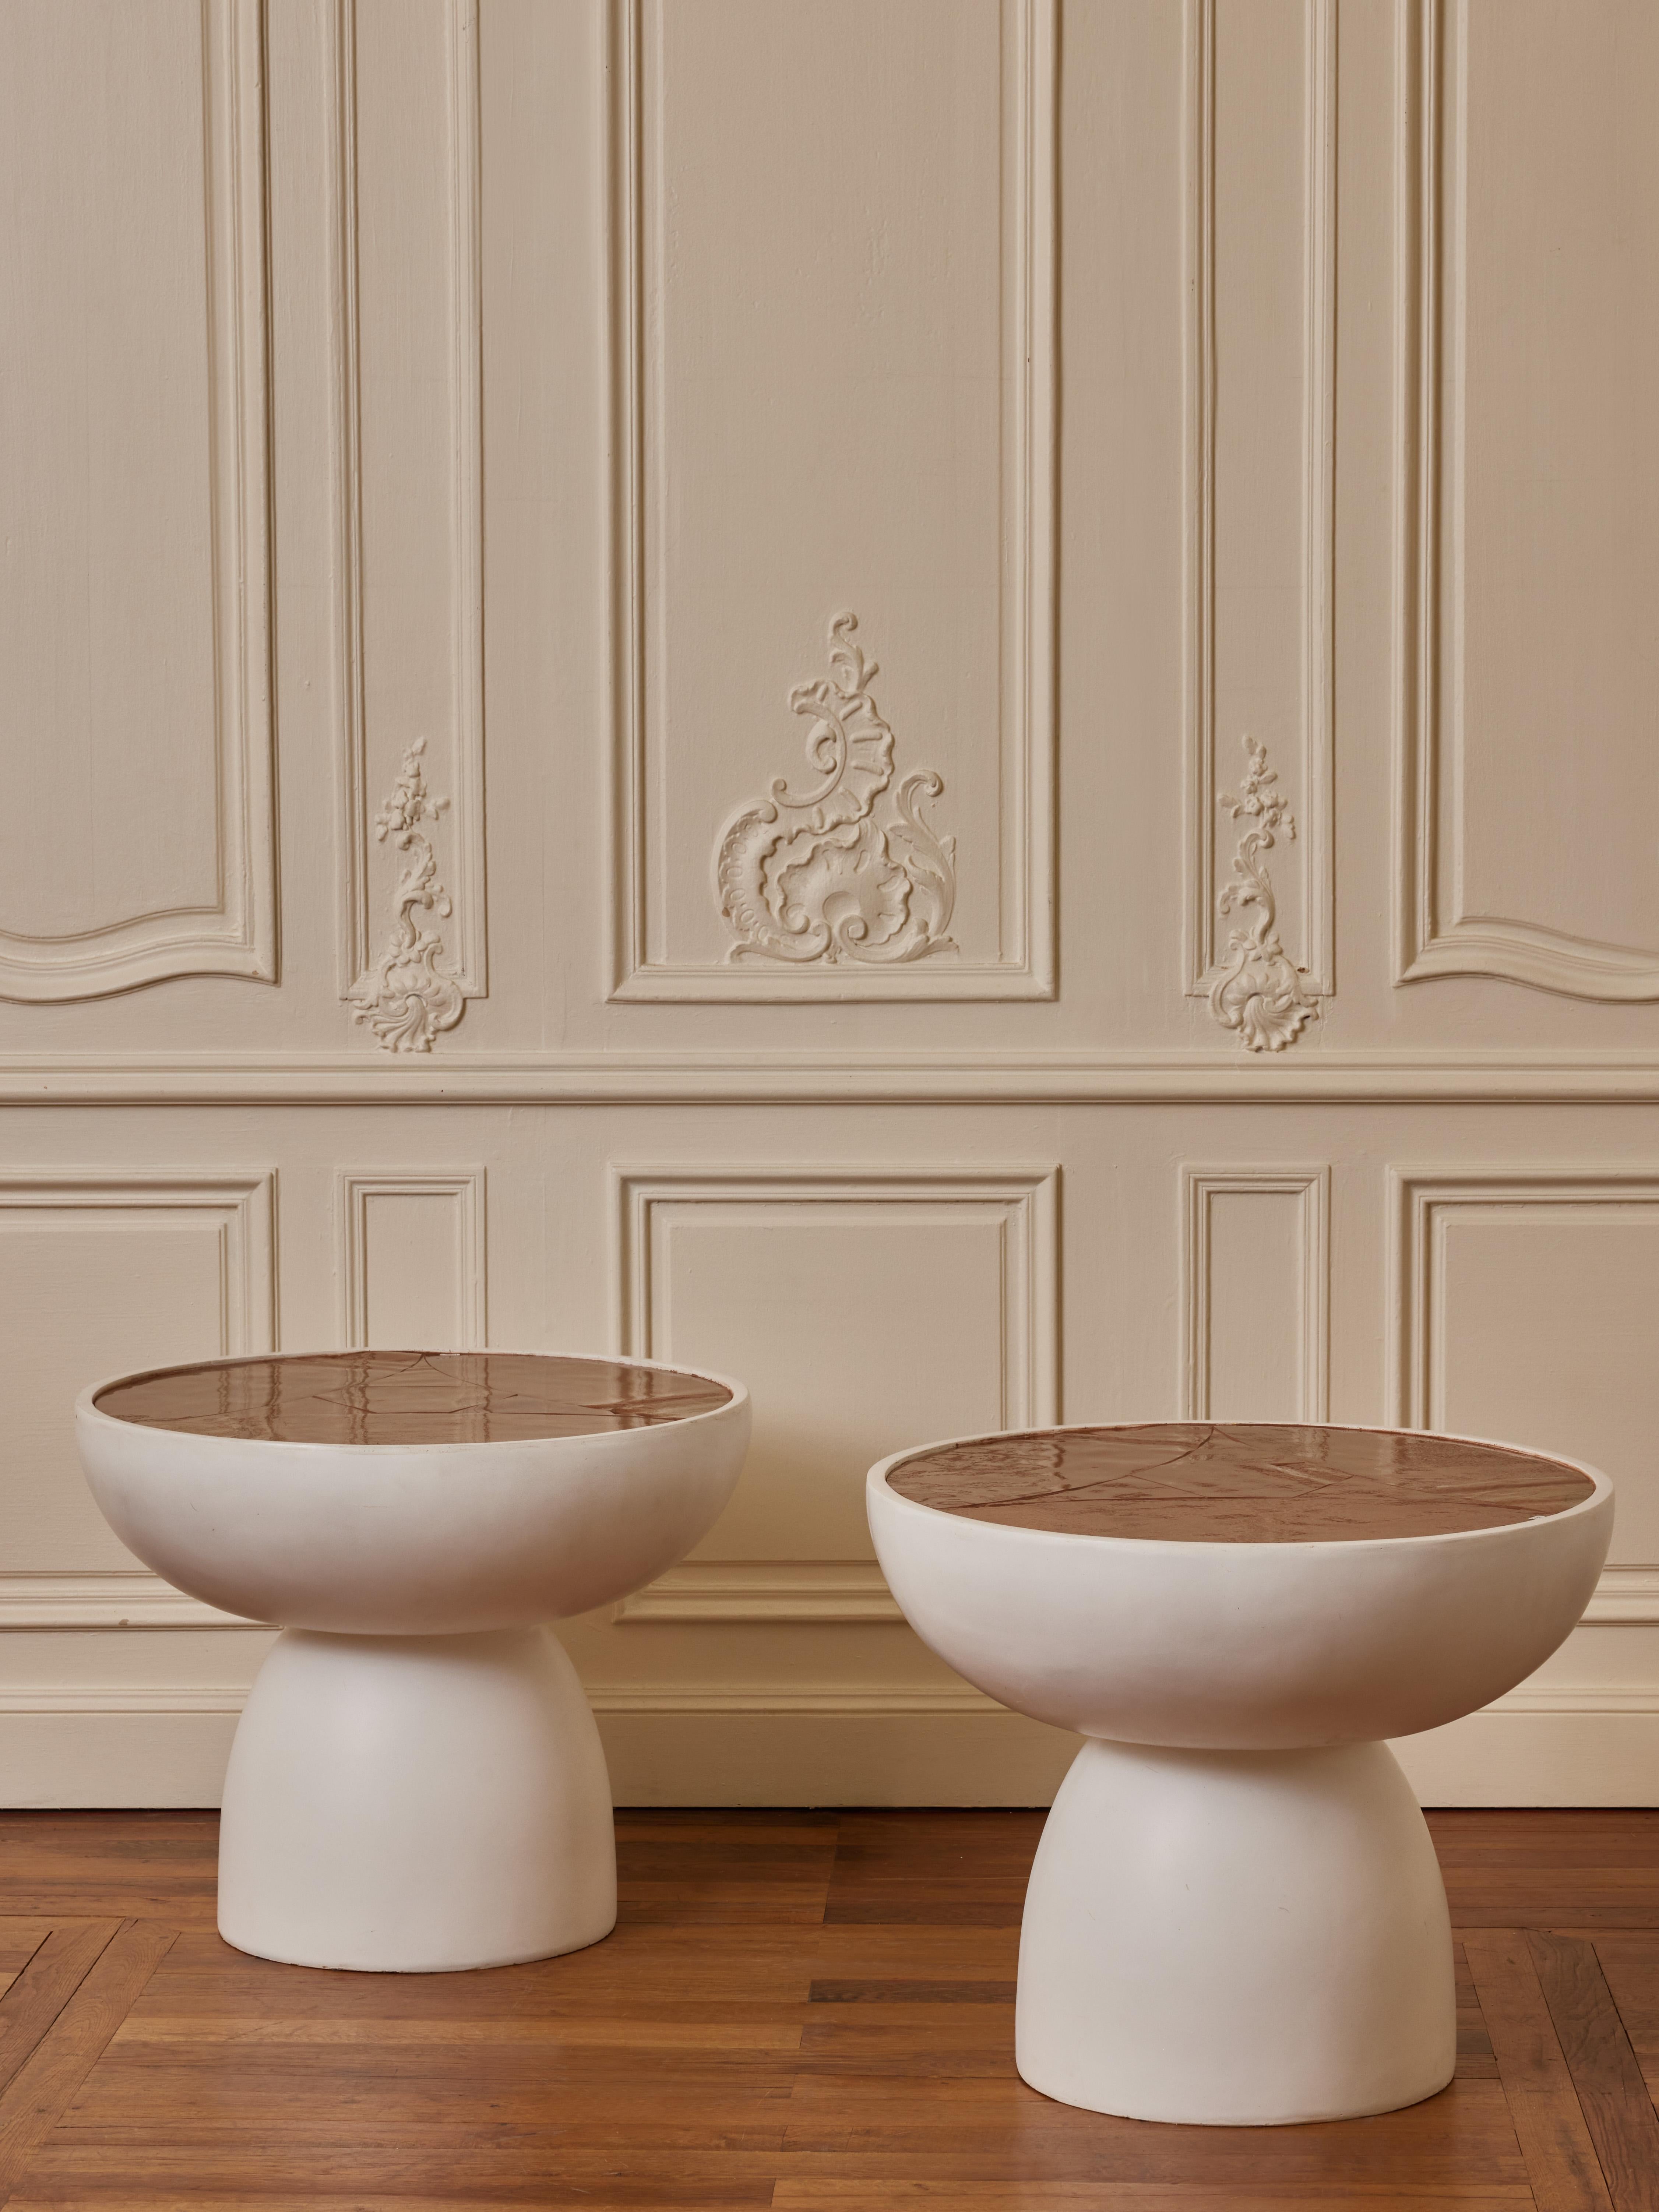 Superb pair of pedestal in white ceramic with top in old Murano glass plates.
Creation by Studio Glustin.
Italy, 2023.